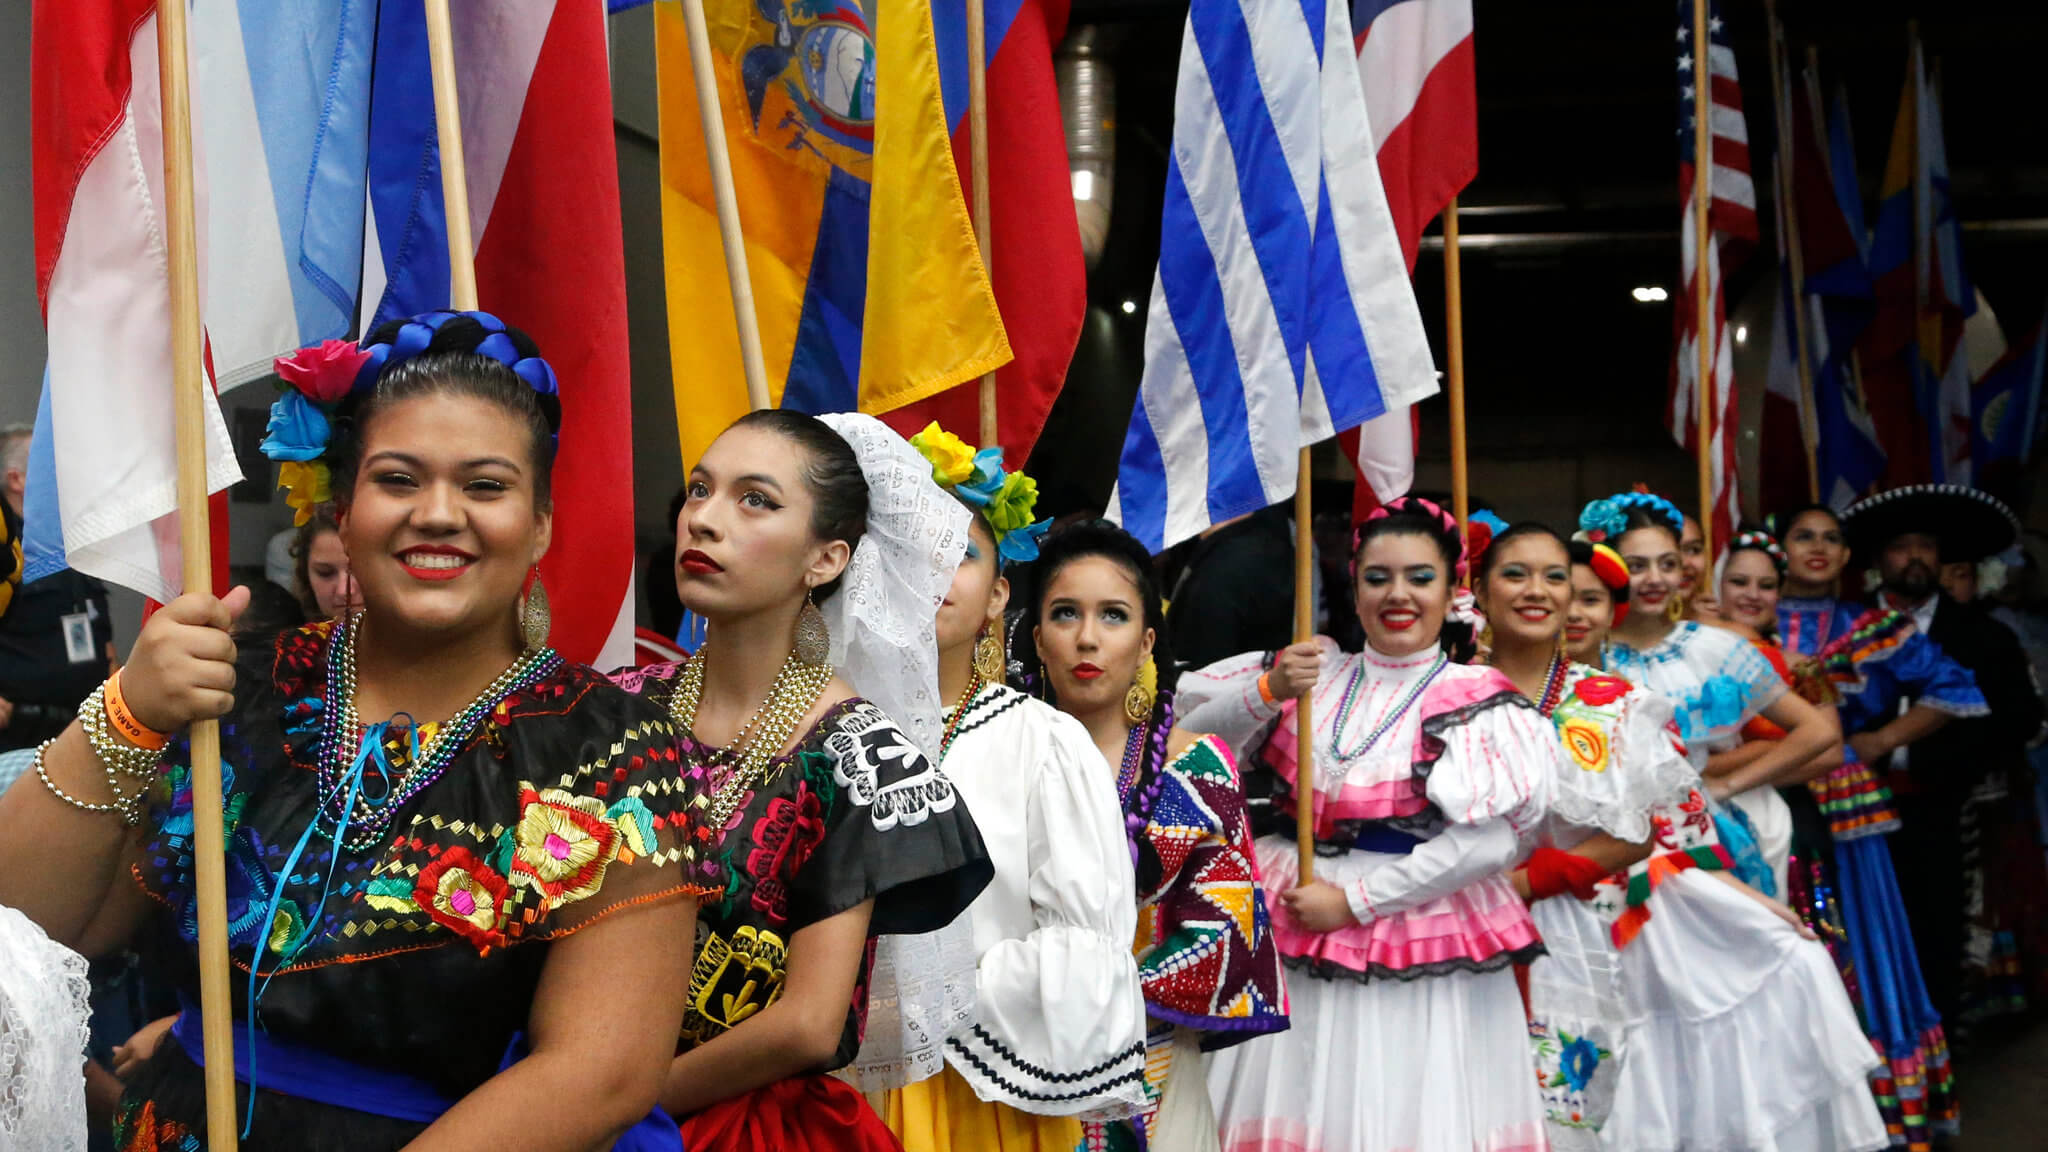 A parade of Hispanic women dressed in their traditional clothing and holding their country flags